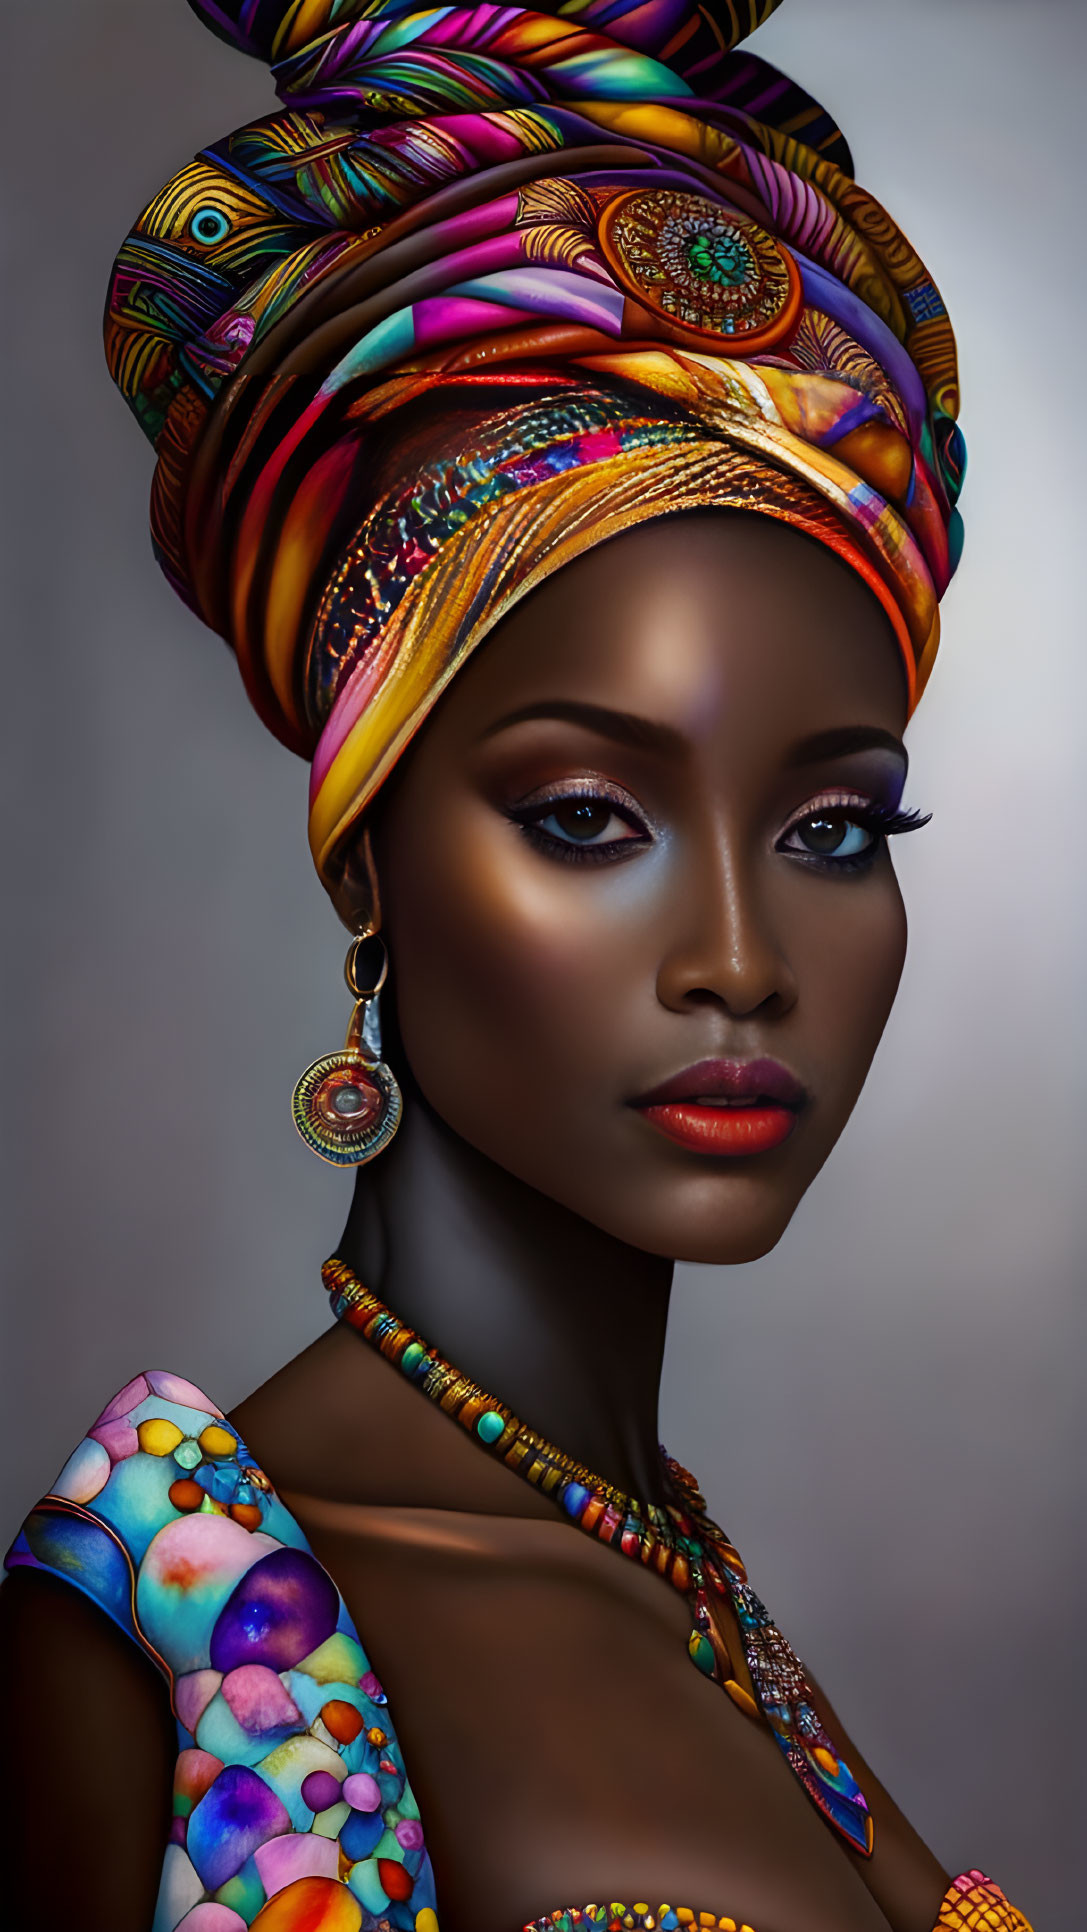 Colorful Head Wrap and Striking Makeup on Woman